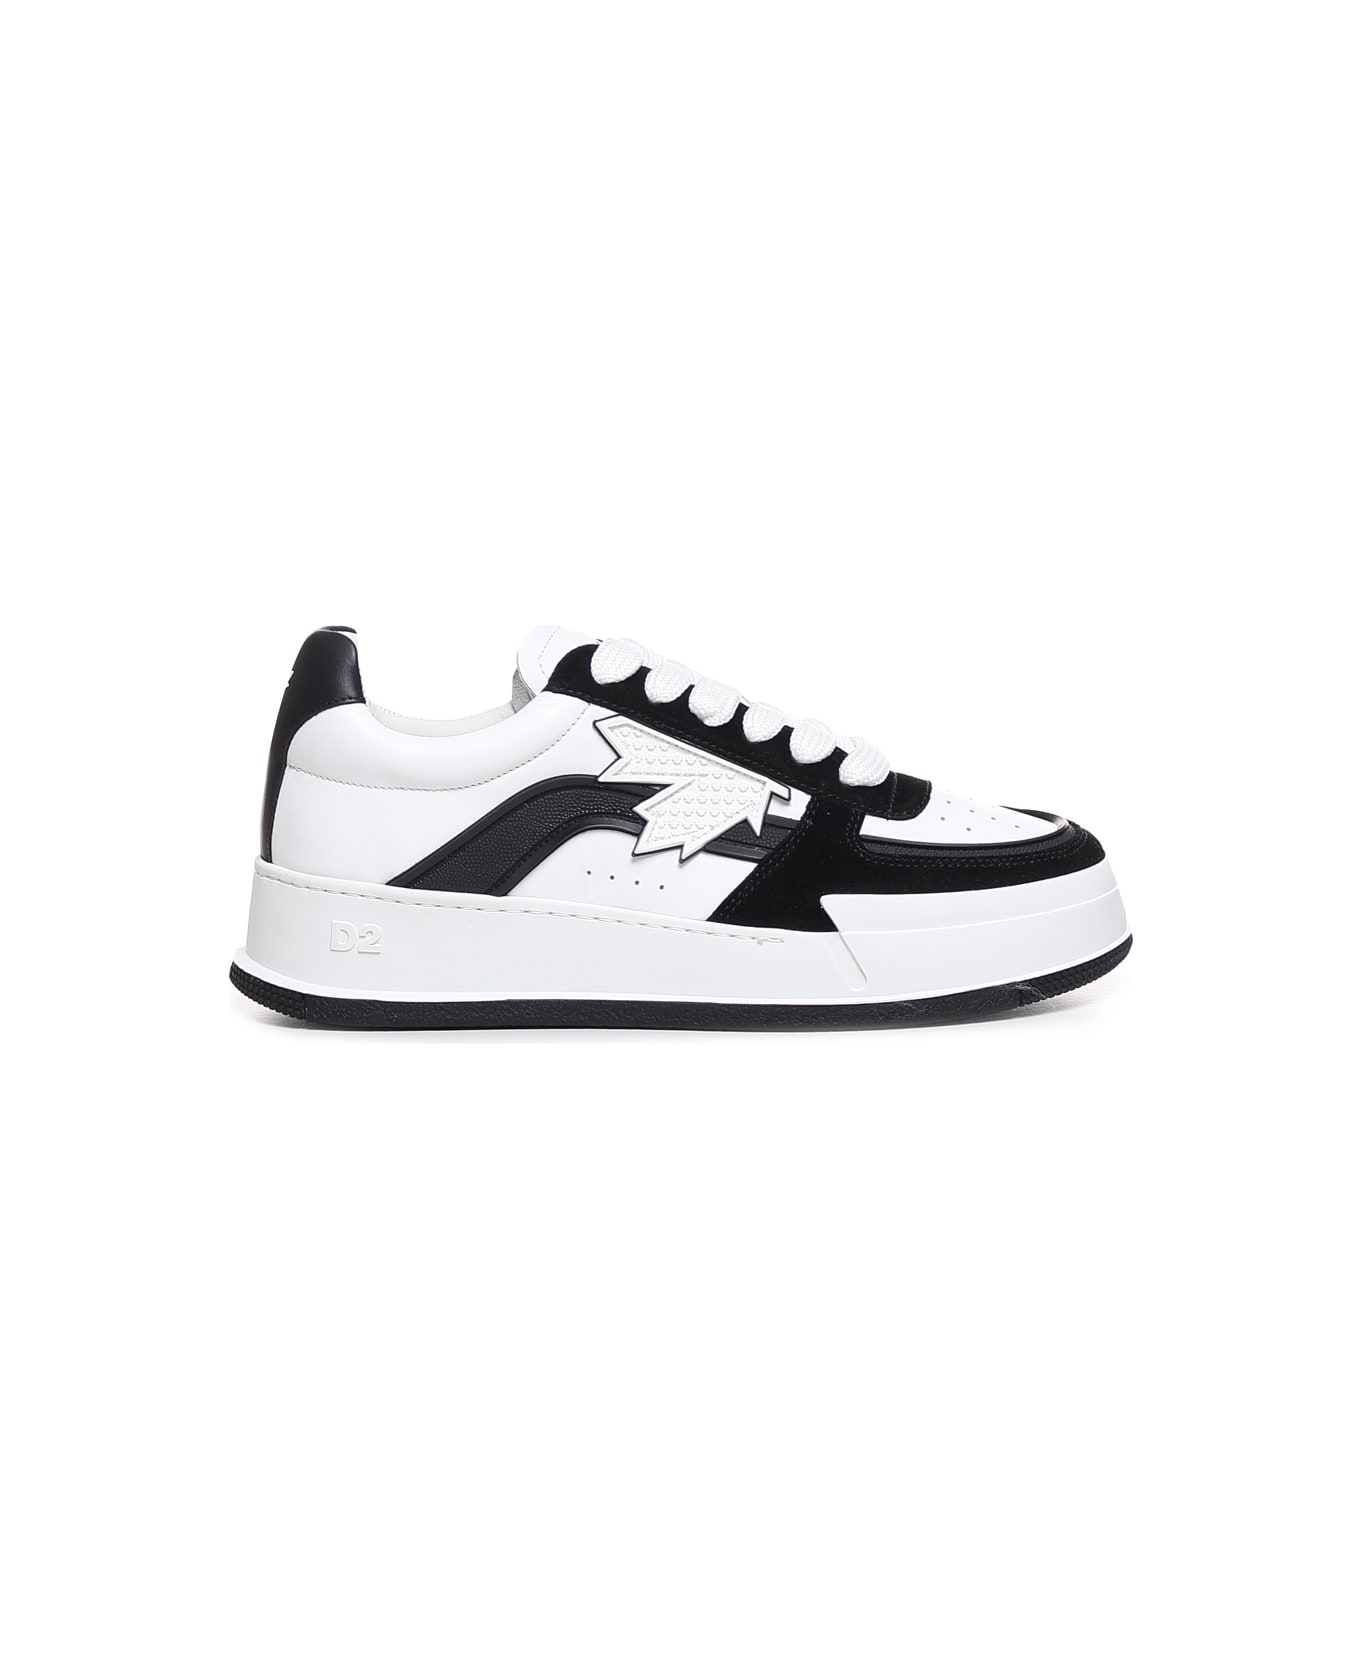 Dsquared2 'canadian' Sneakers - Black, white